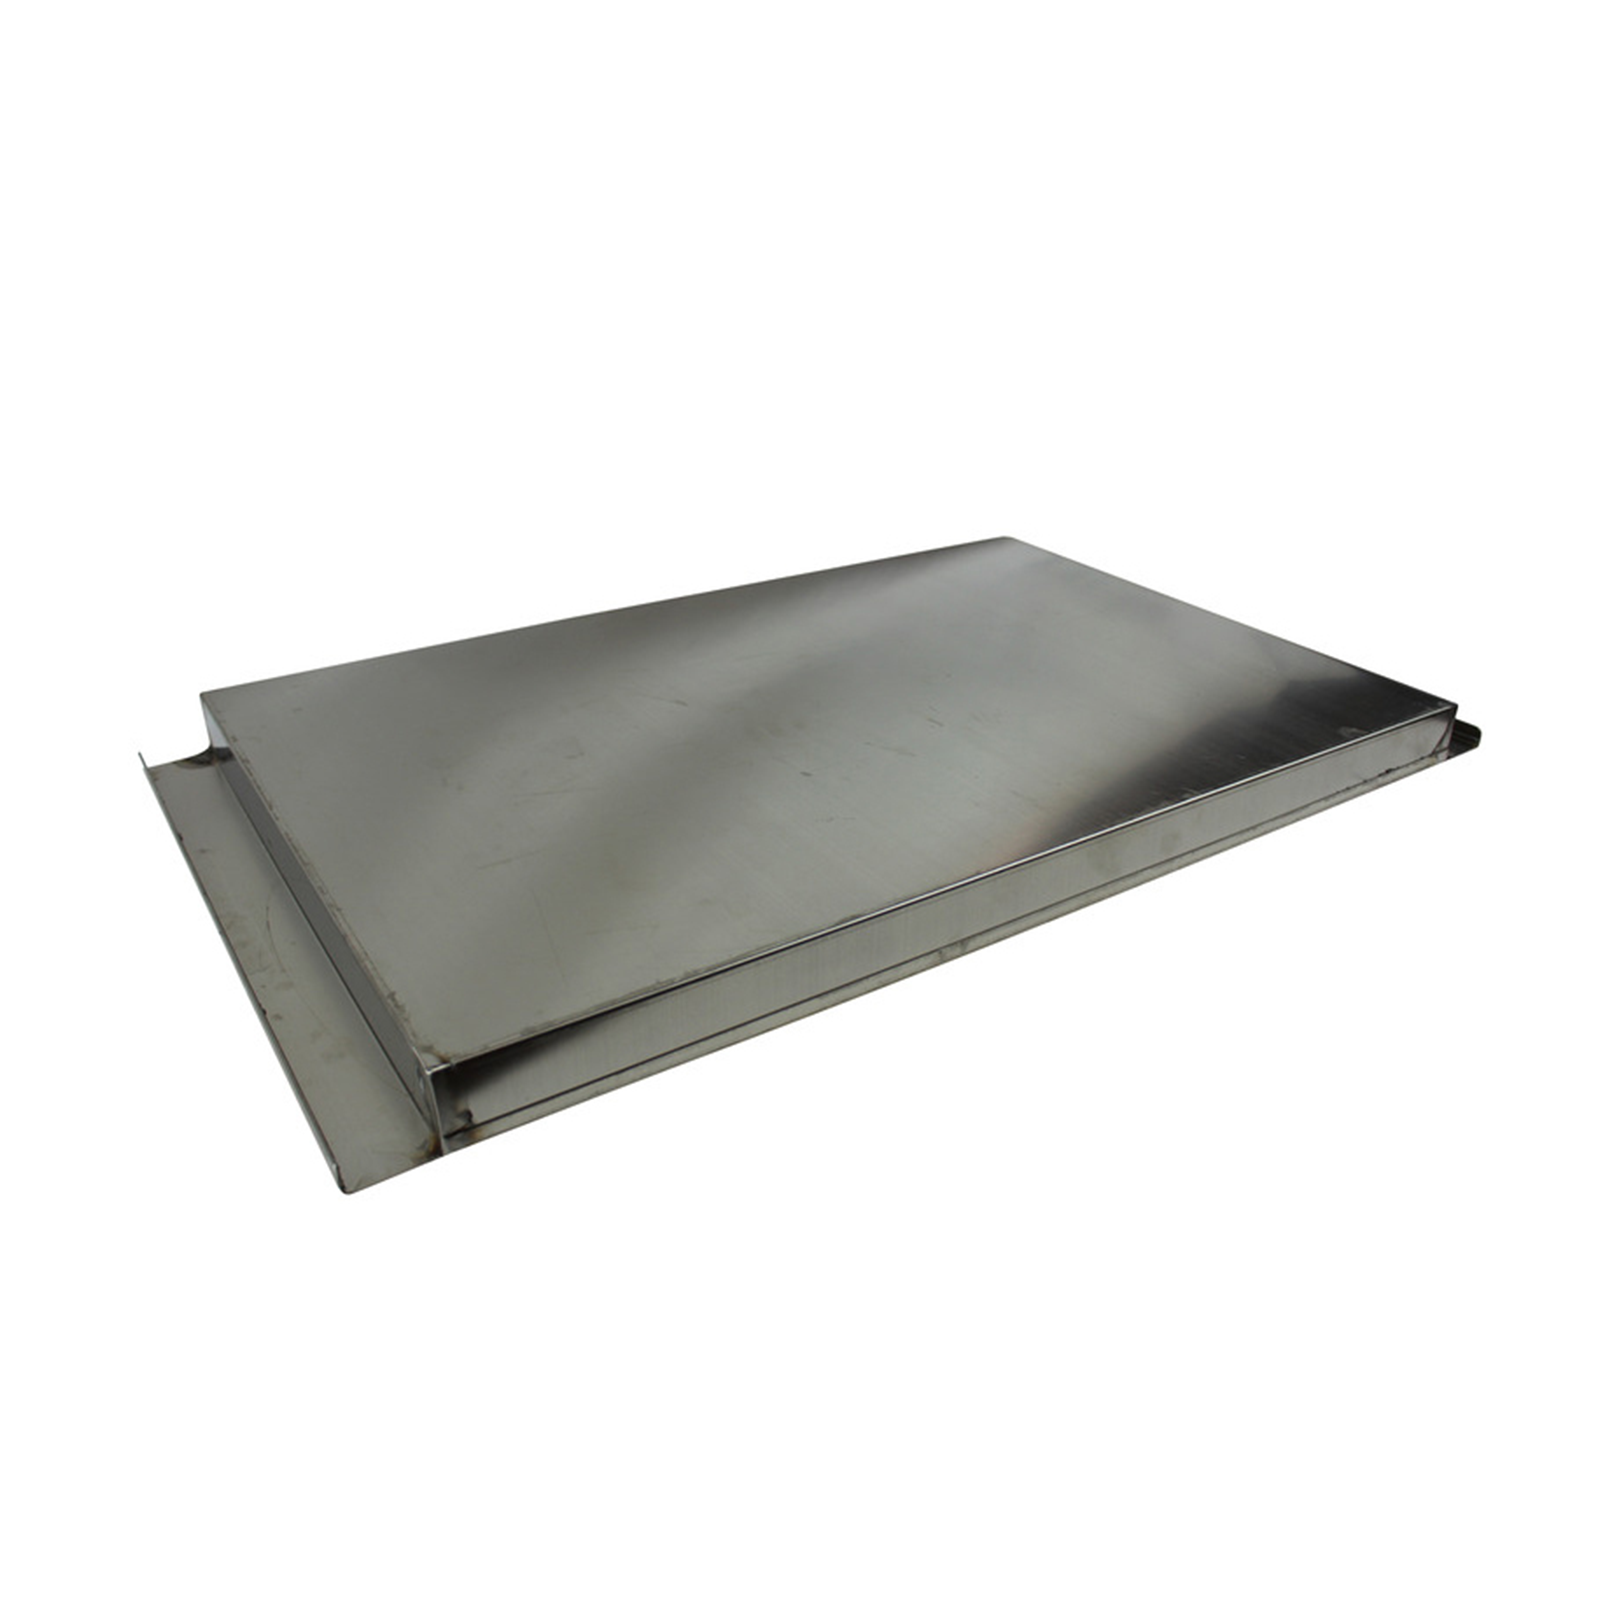 S/S Cutting /Carving /Serving Tray750mm (L) X 485mm (W) X 45(H) for Spit BBQ Rotisserie